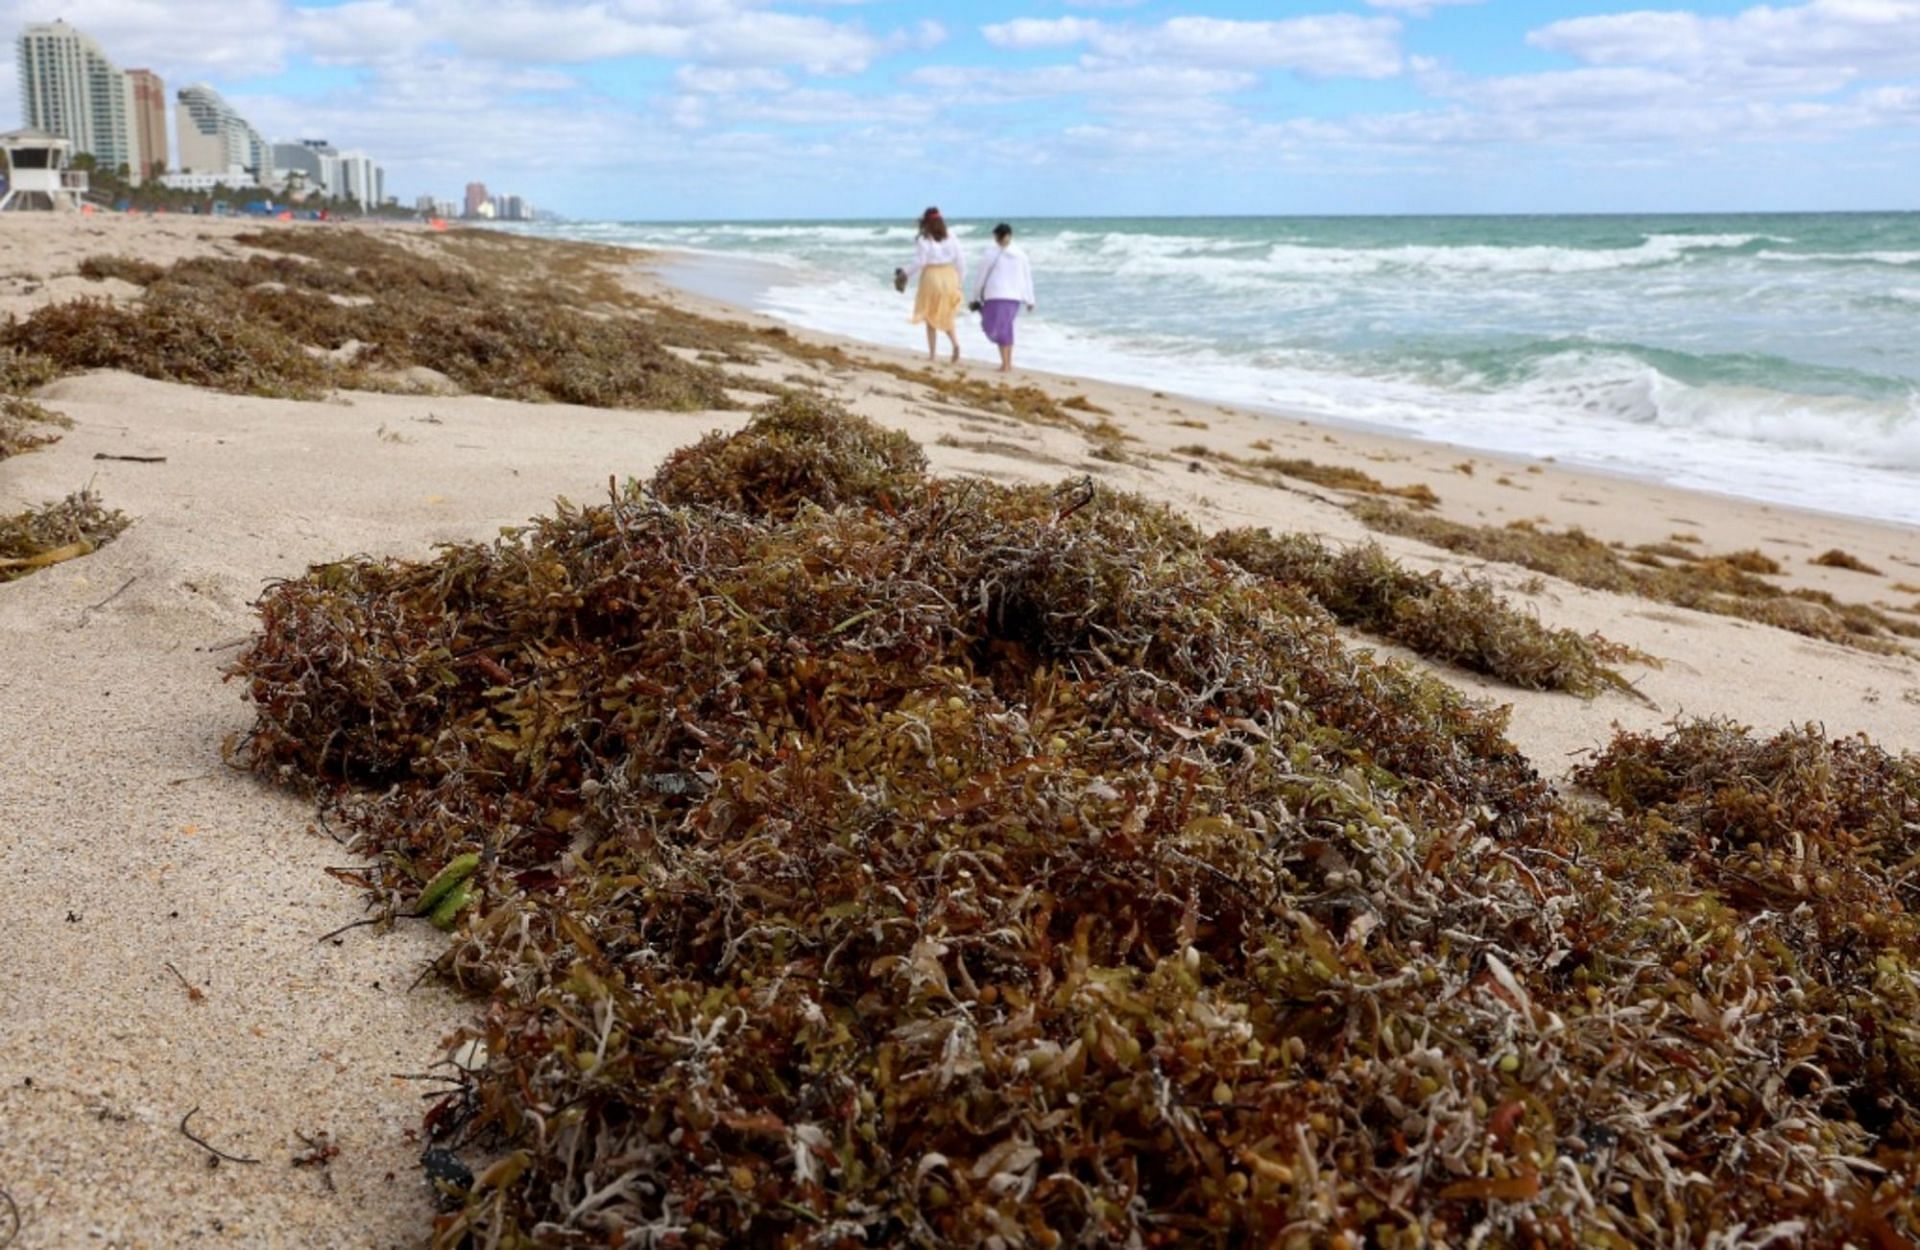 Giant blobs of seaweed make their way to Florida (Image via Getty Images)